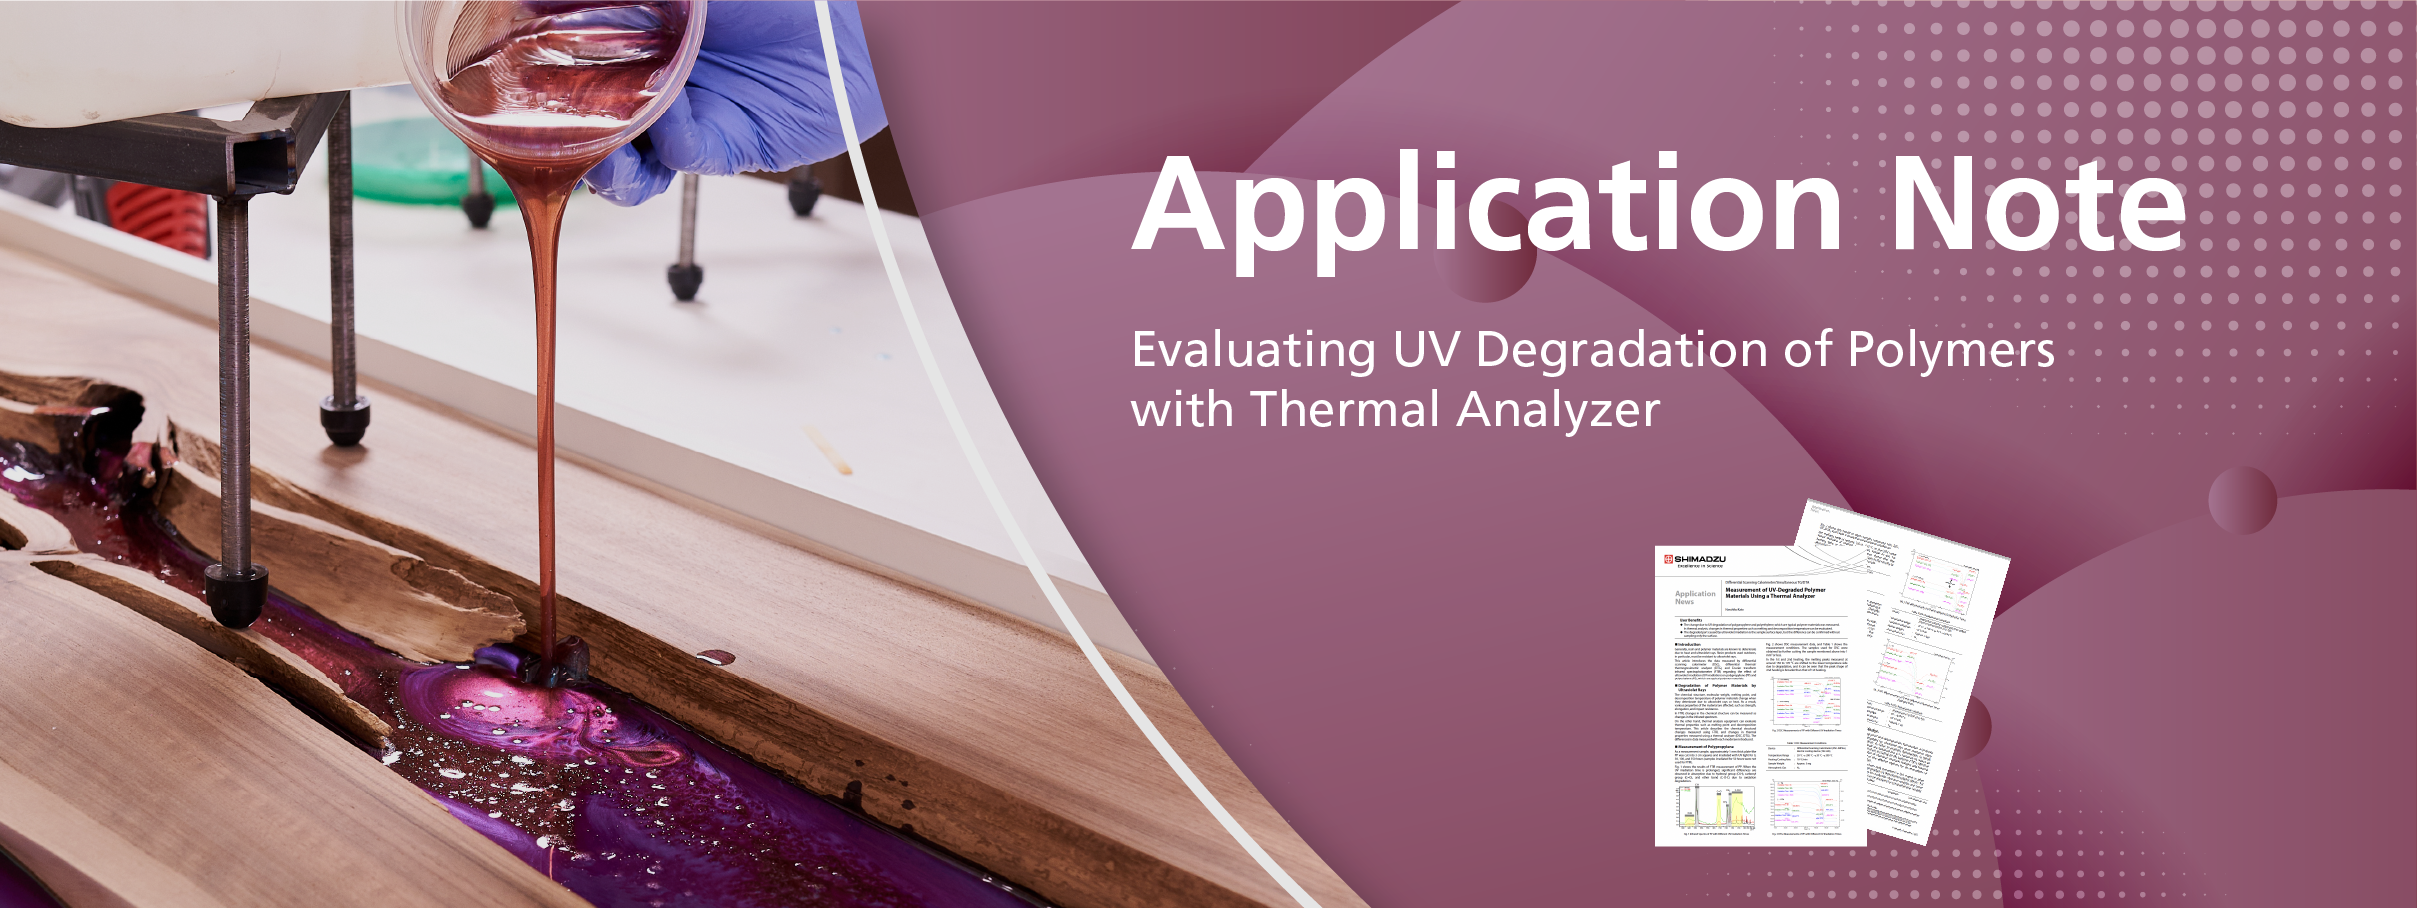 Evaluating UV Degradation of Polymers with Thermal Analyzer